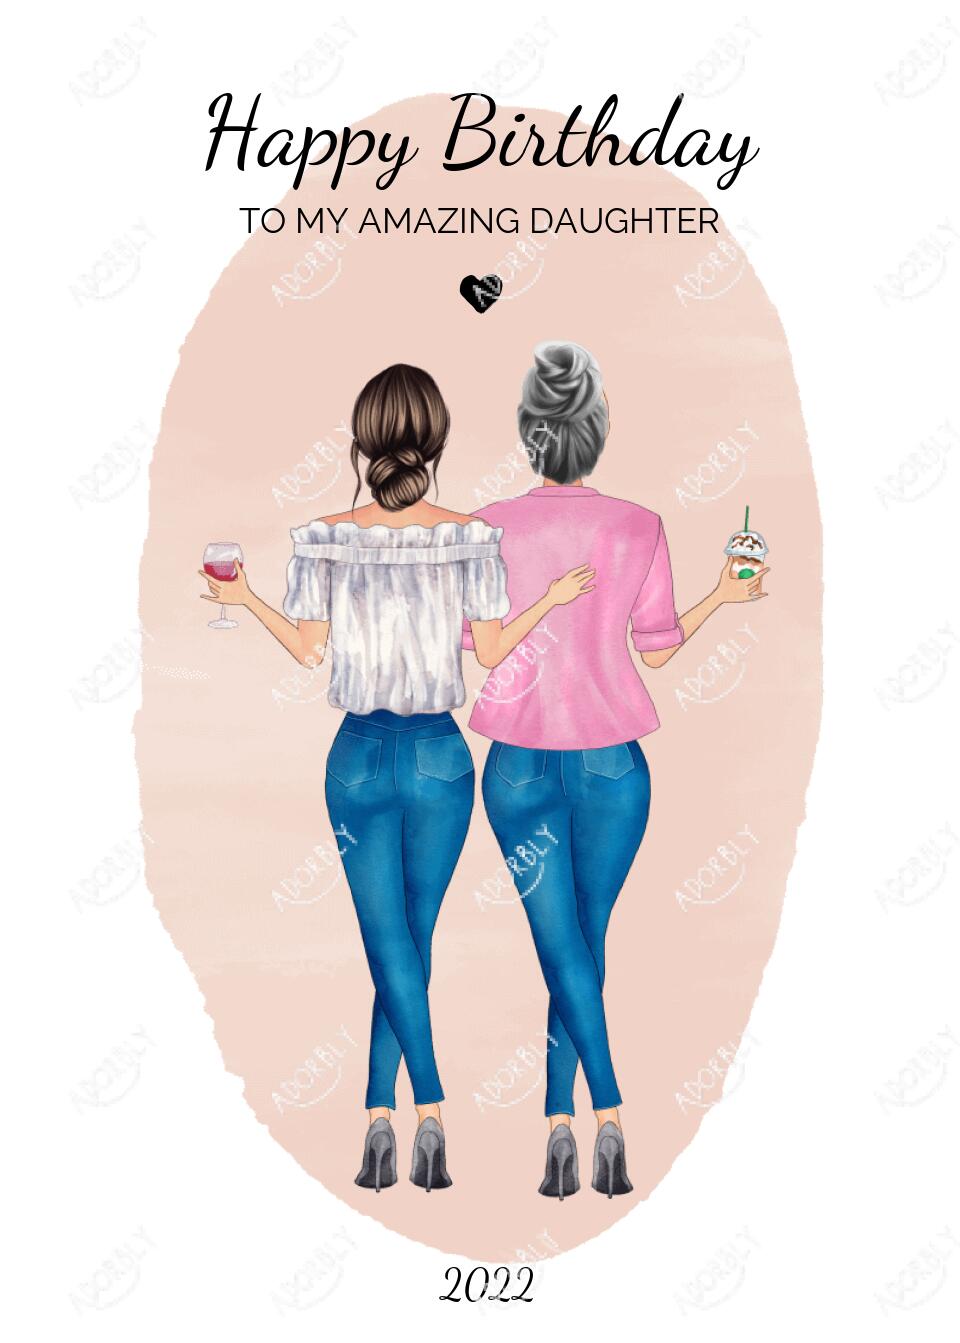 To My Amazing Daughter - Personalized Birthday Card